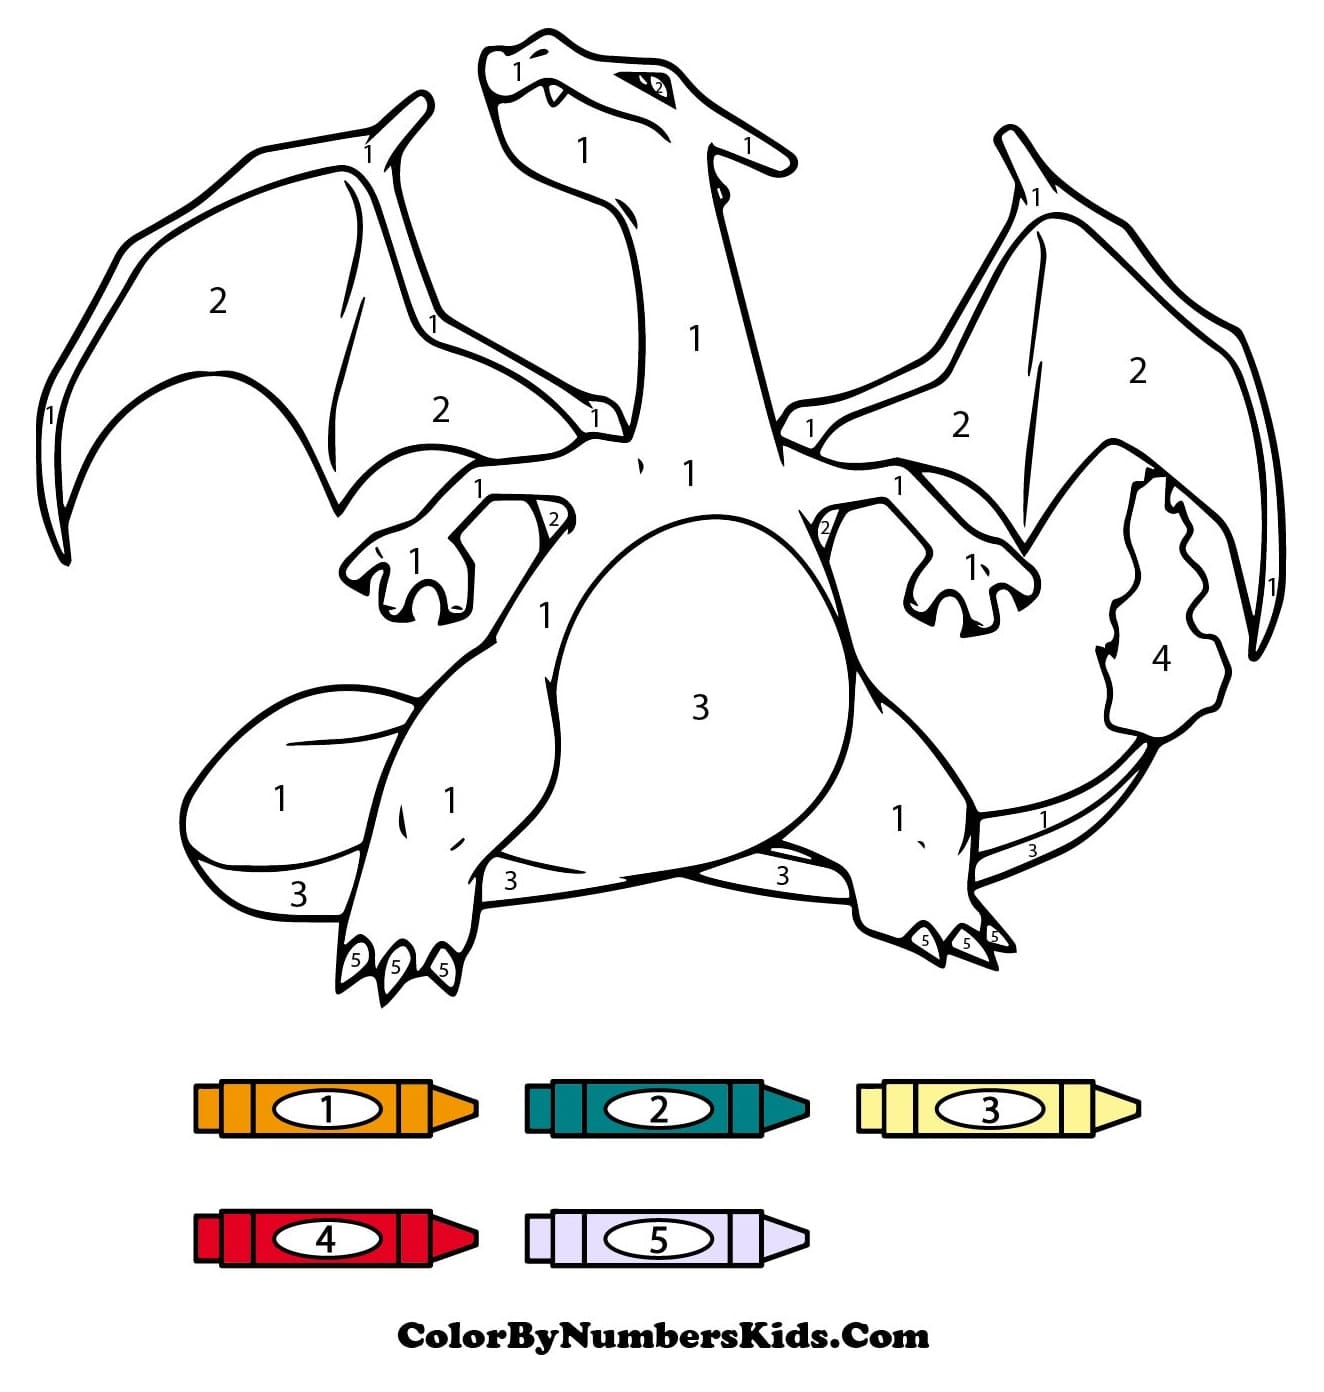 Pokemon Charizard Color By Number